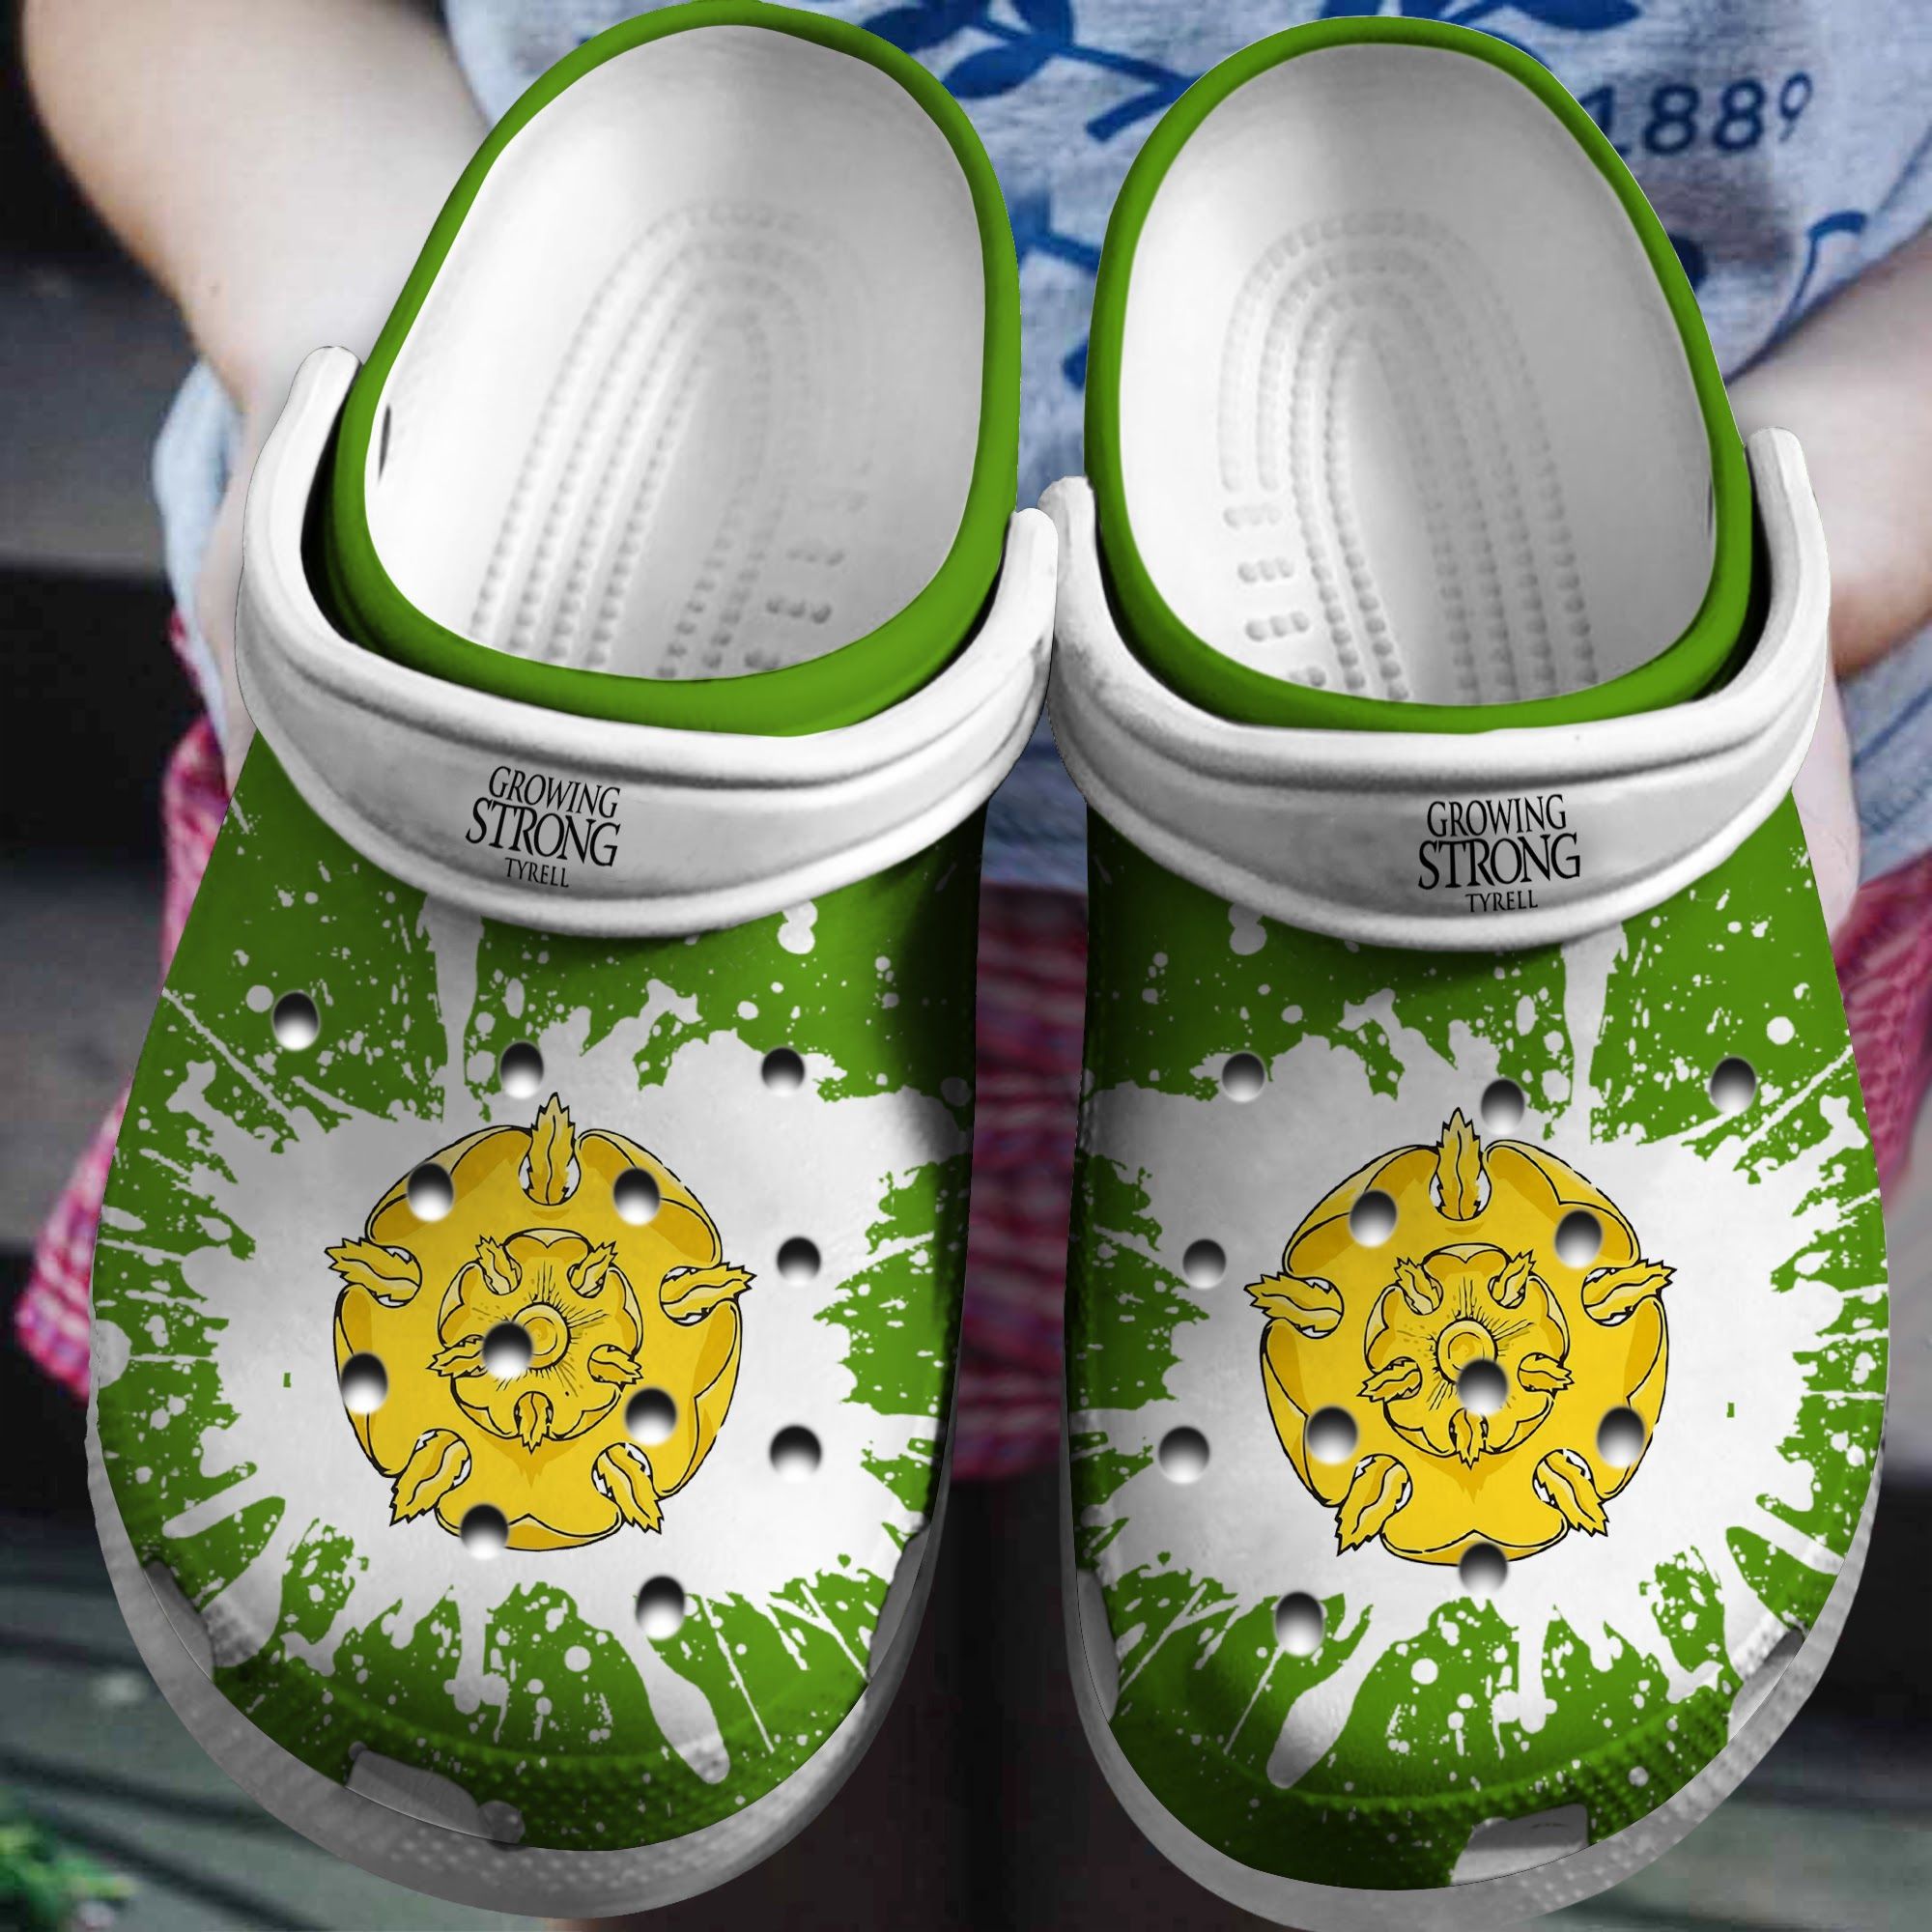 Find yourself a super cute Crocs shoe or give it as a gift 173